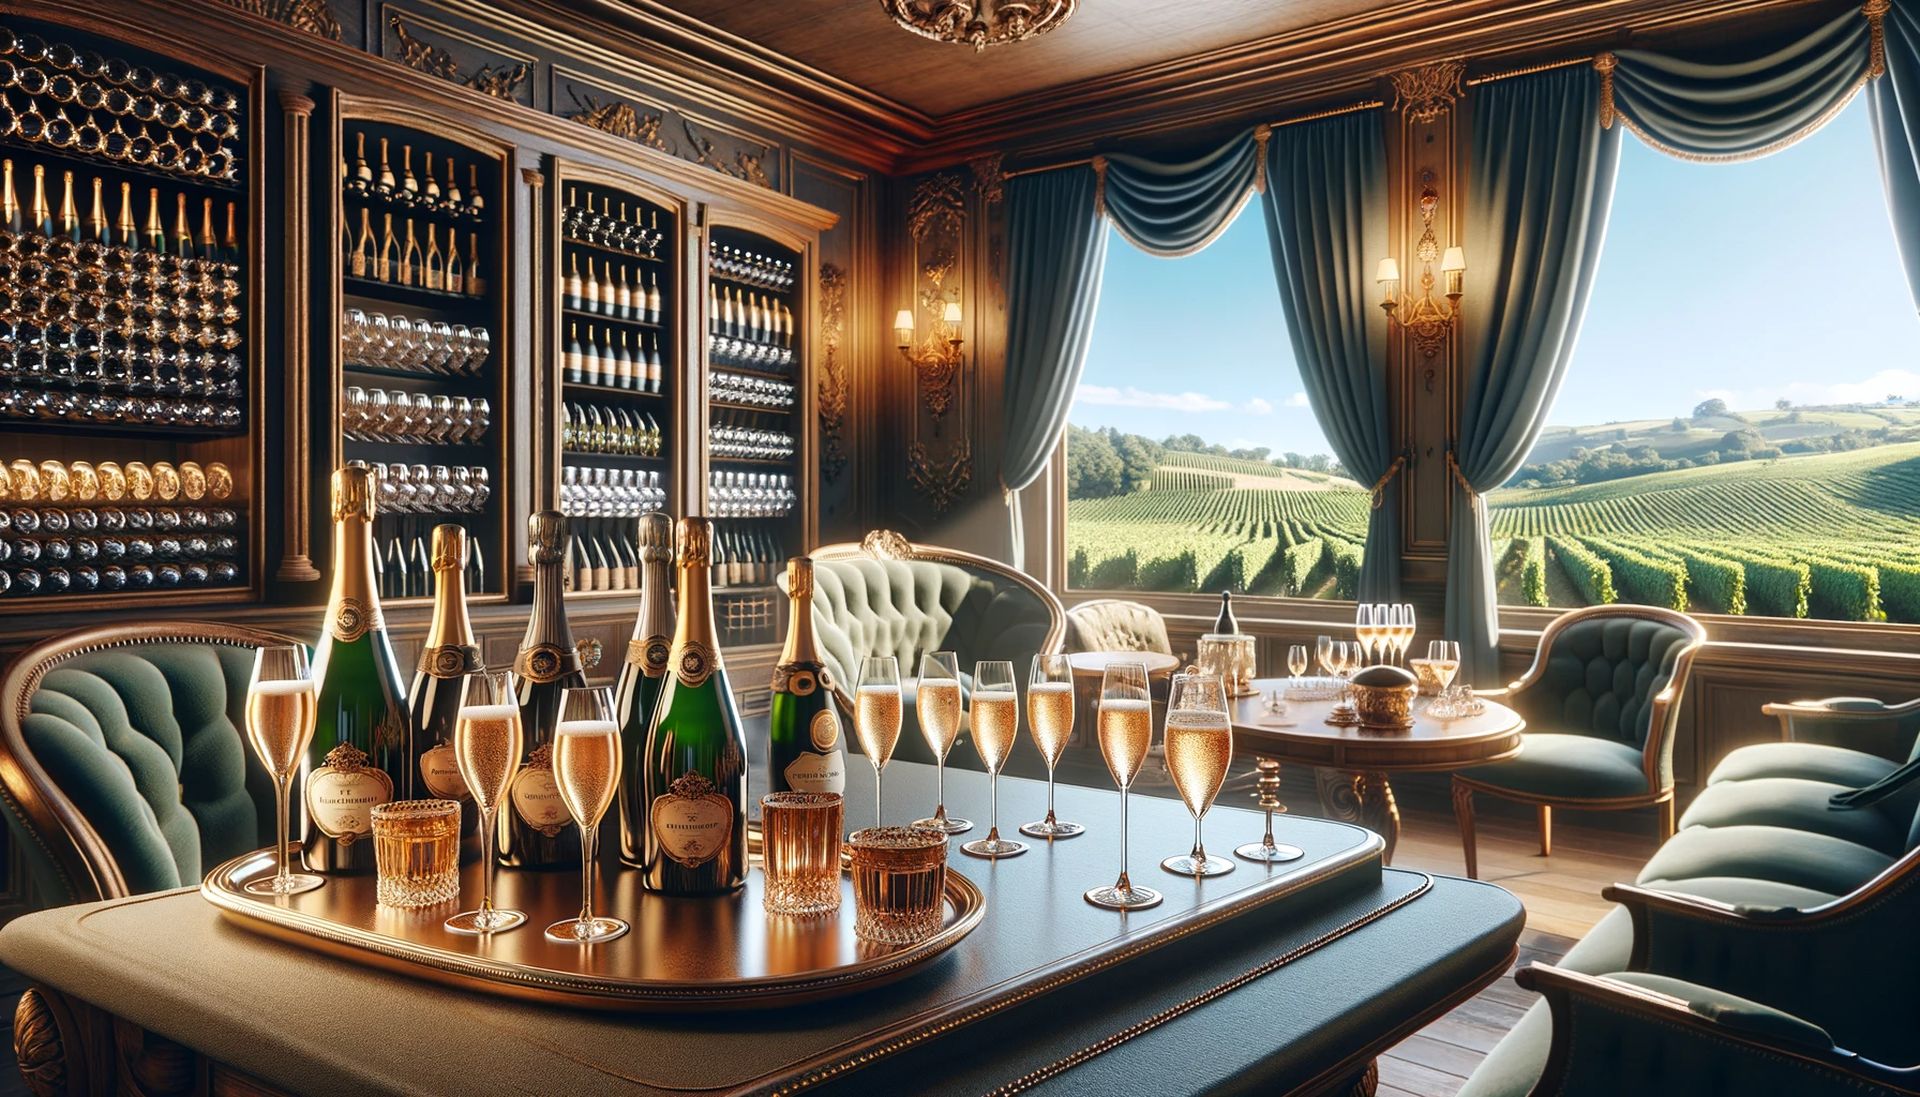 An elegant and sophisticated champagne tasting room, showcasing a variety of champagne bottles and glasses filled with sparkling champagne